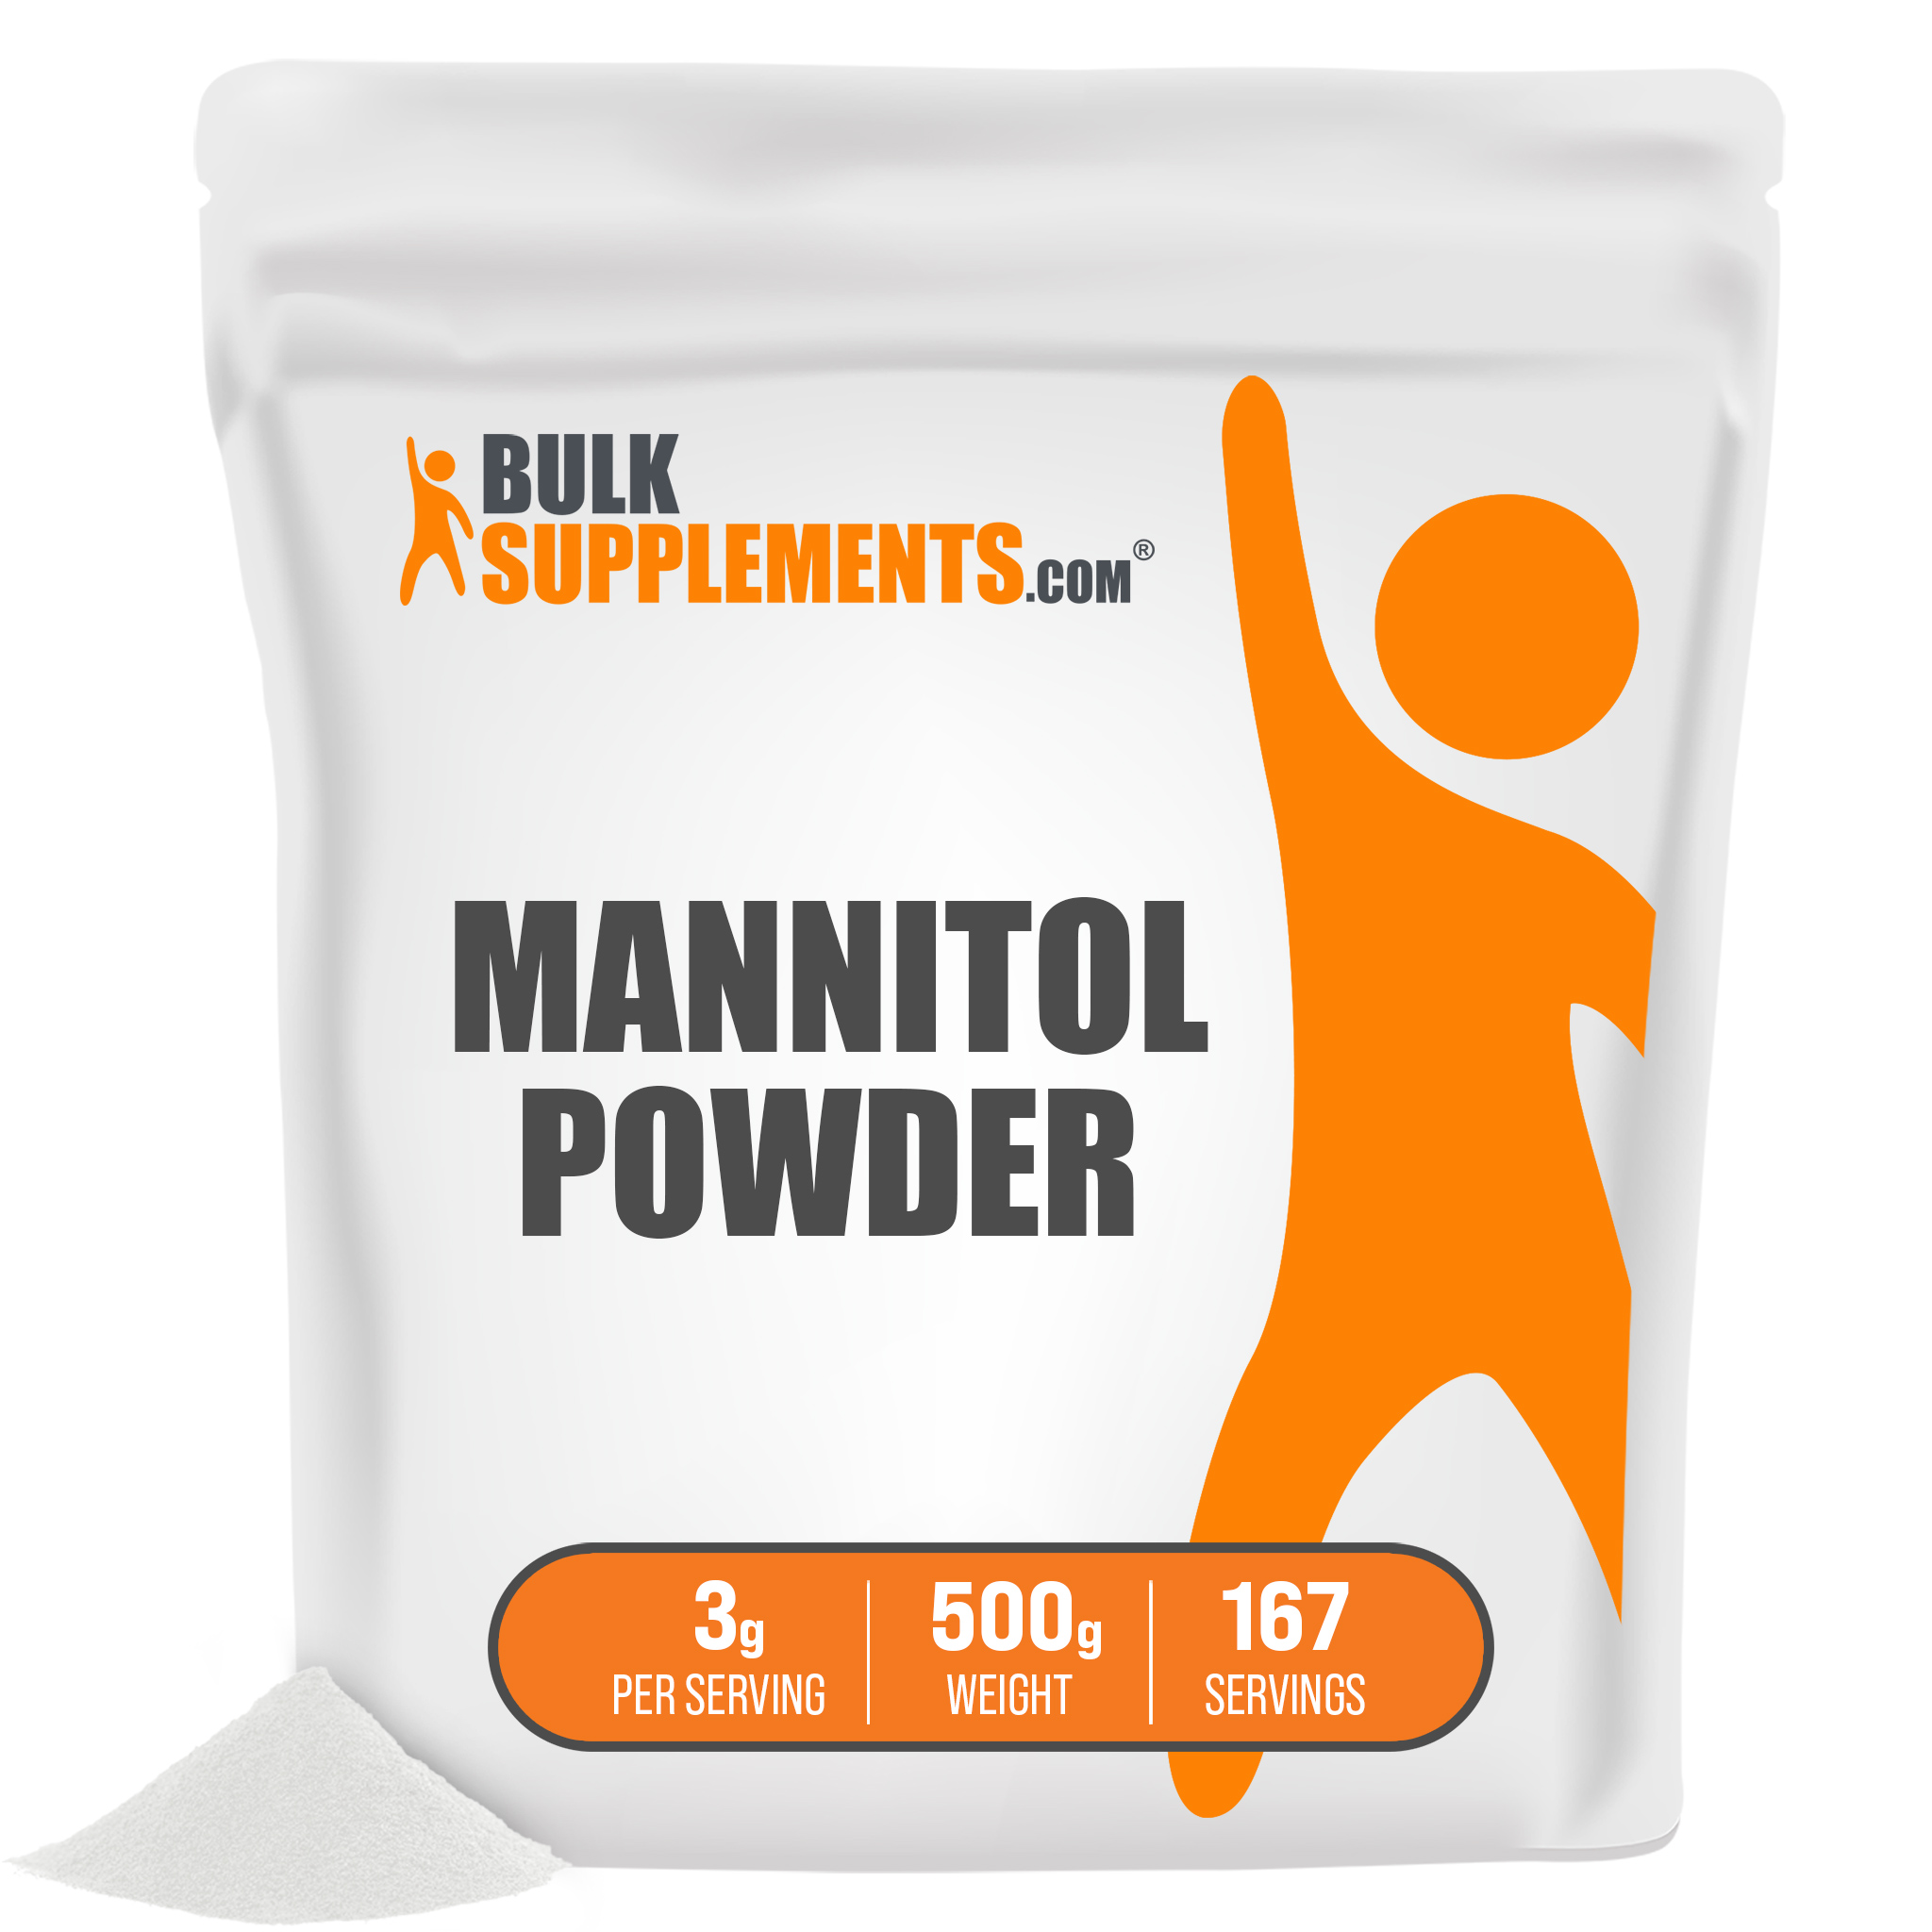 BulkSupplements.com Mannitol Powder - Mannitol Sweetener - Mannitol Powder Ultra Pure - Mannitol Sugar (500 Grams - 1.1 lbs) - image 1 of 5